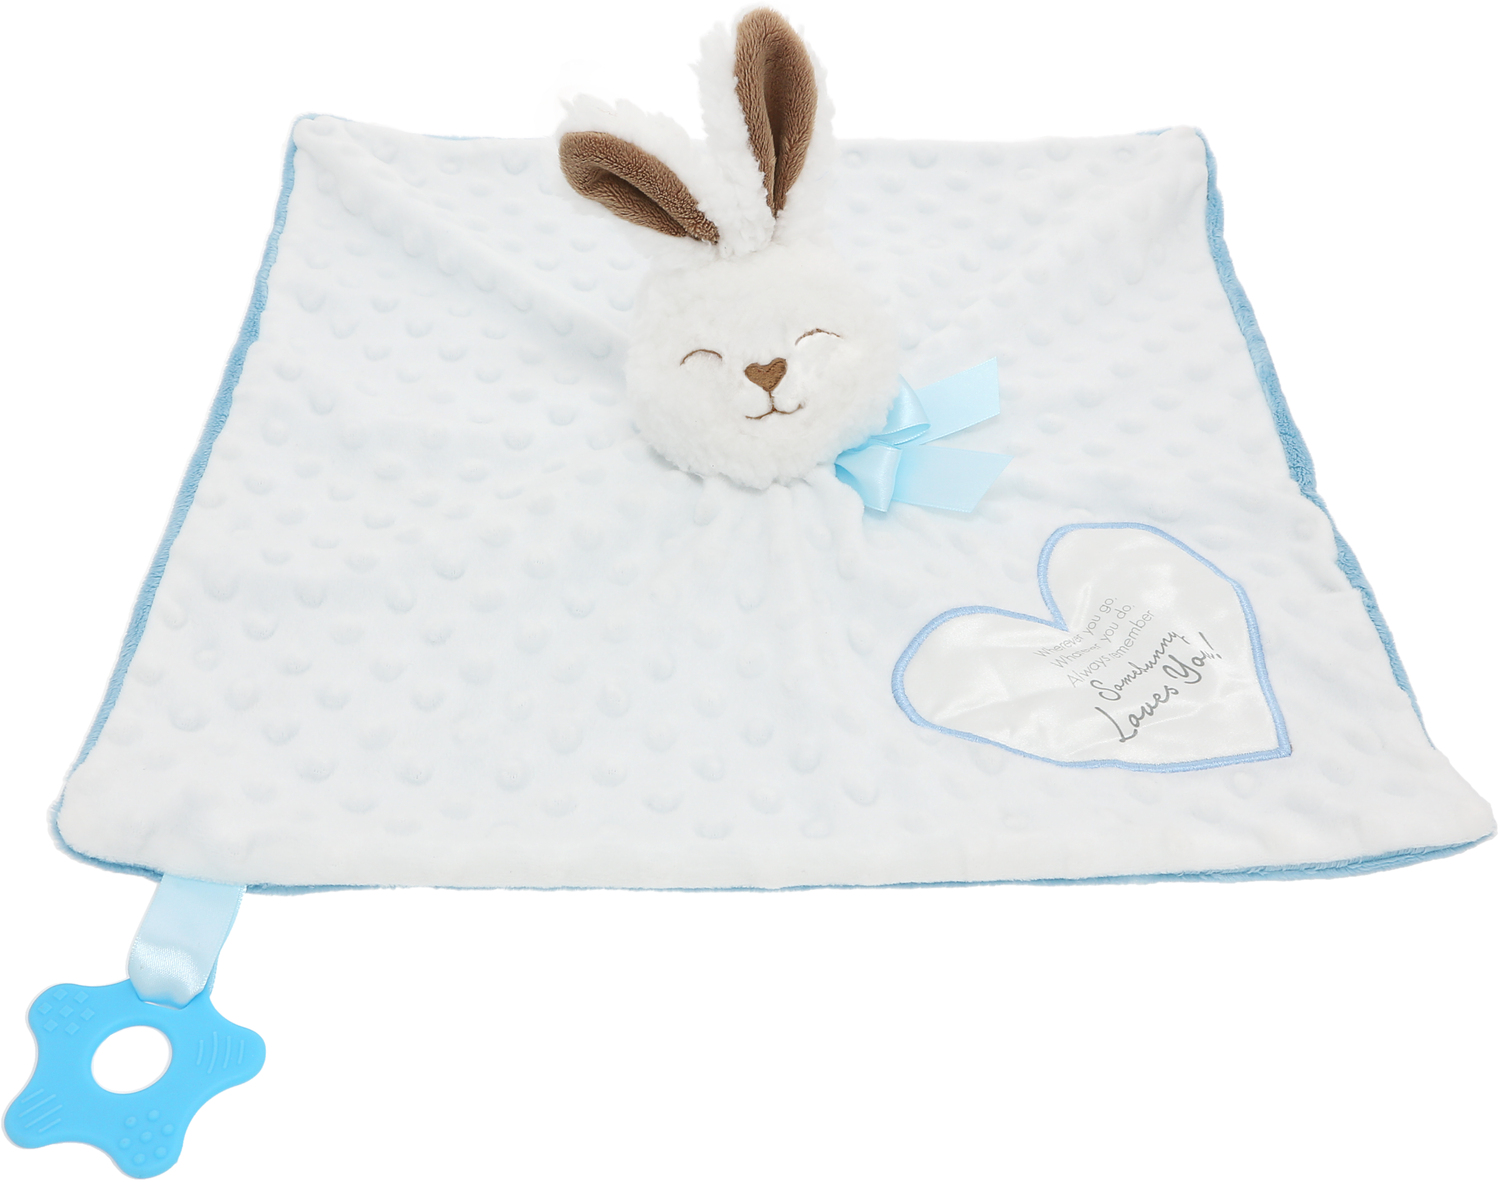 Somebunny Blue Lovey by Comfort Collection - Somebunny Blue Lovey -  Lovey Blanket Bunny with Teether